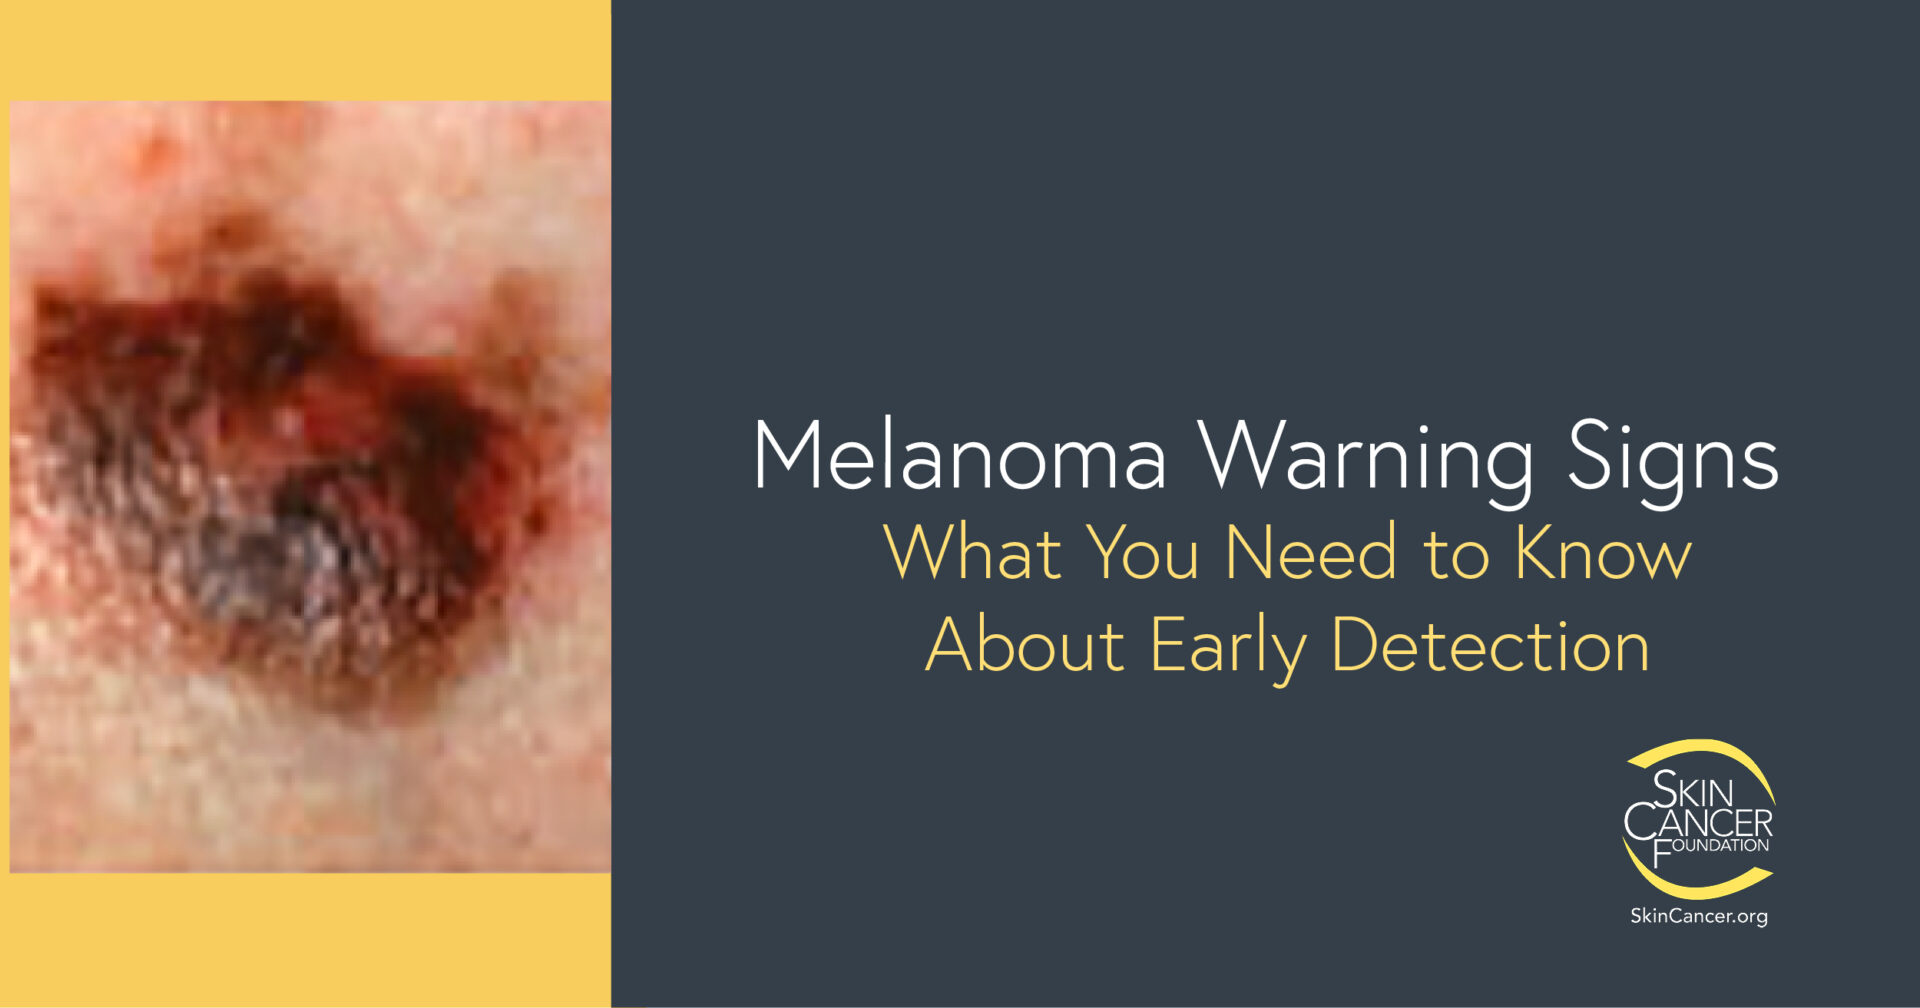 Melanoma Warning Signs and Images - The Skin Cancer Foundation